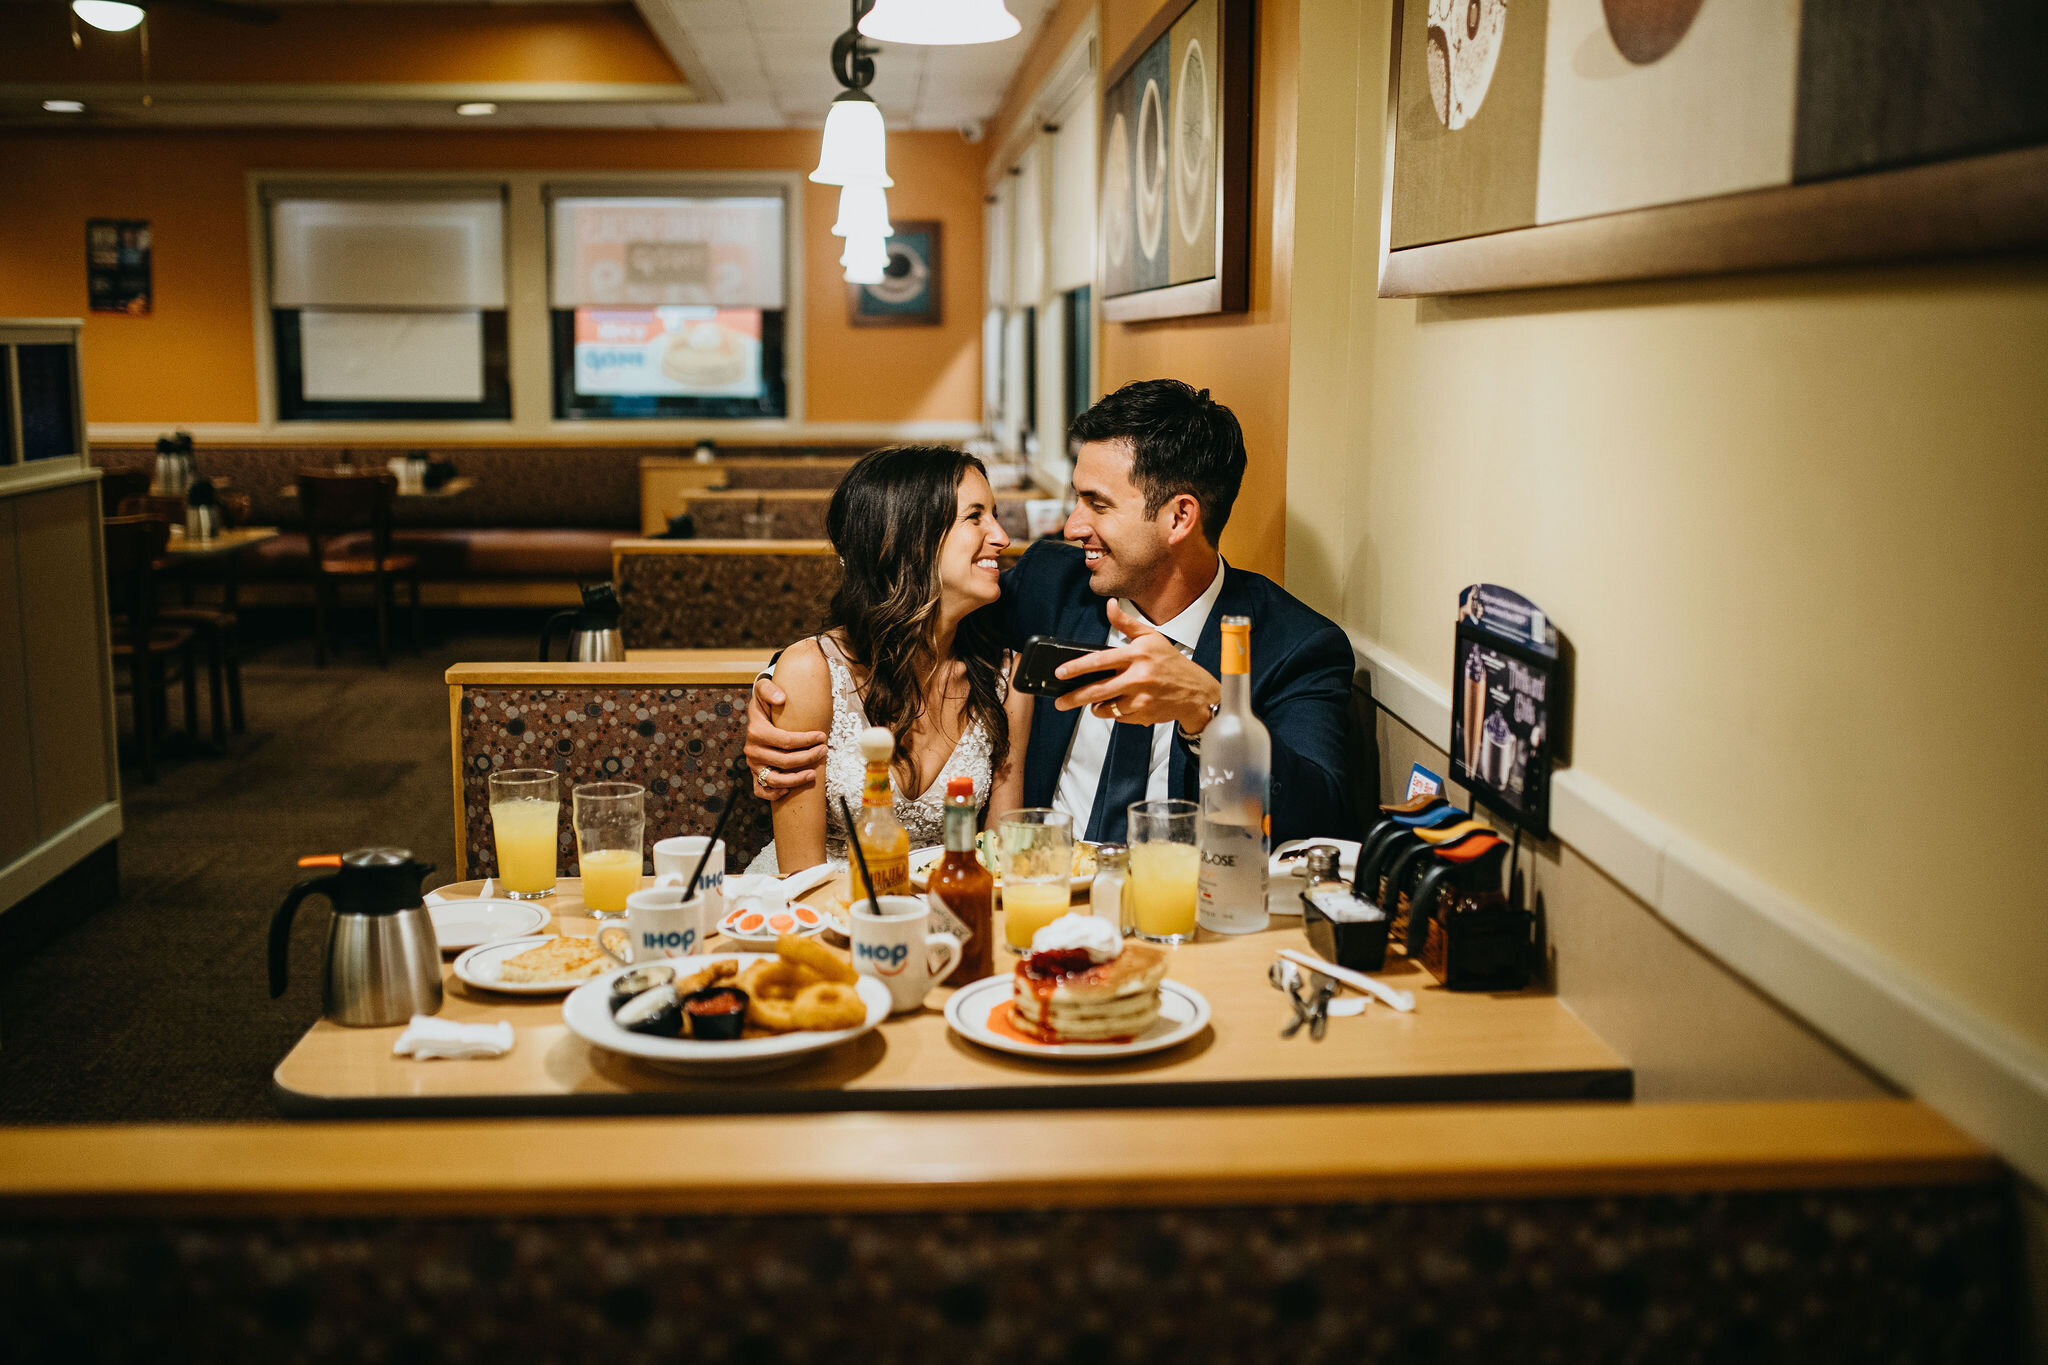 After the reception, why not go to iHop for late night pancakes?